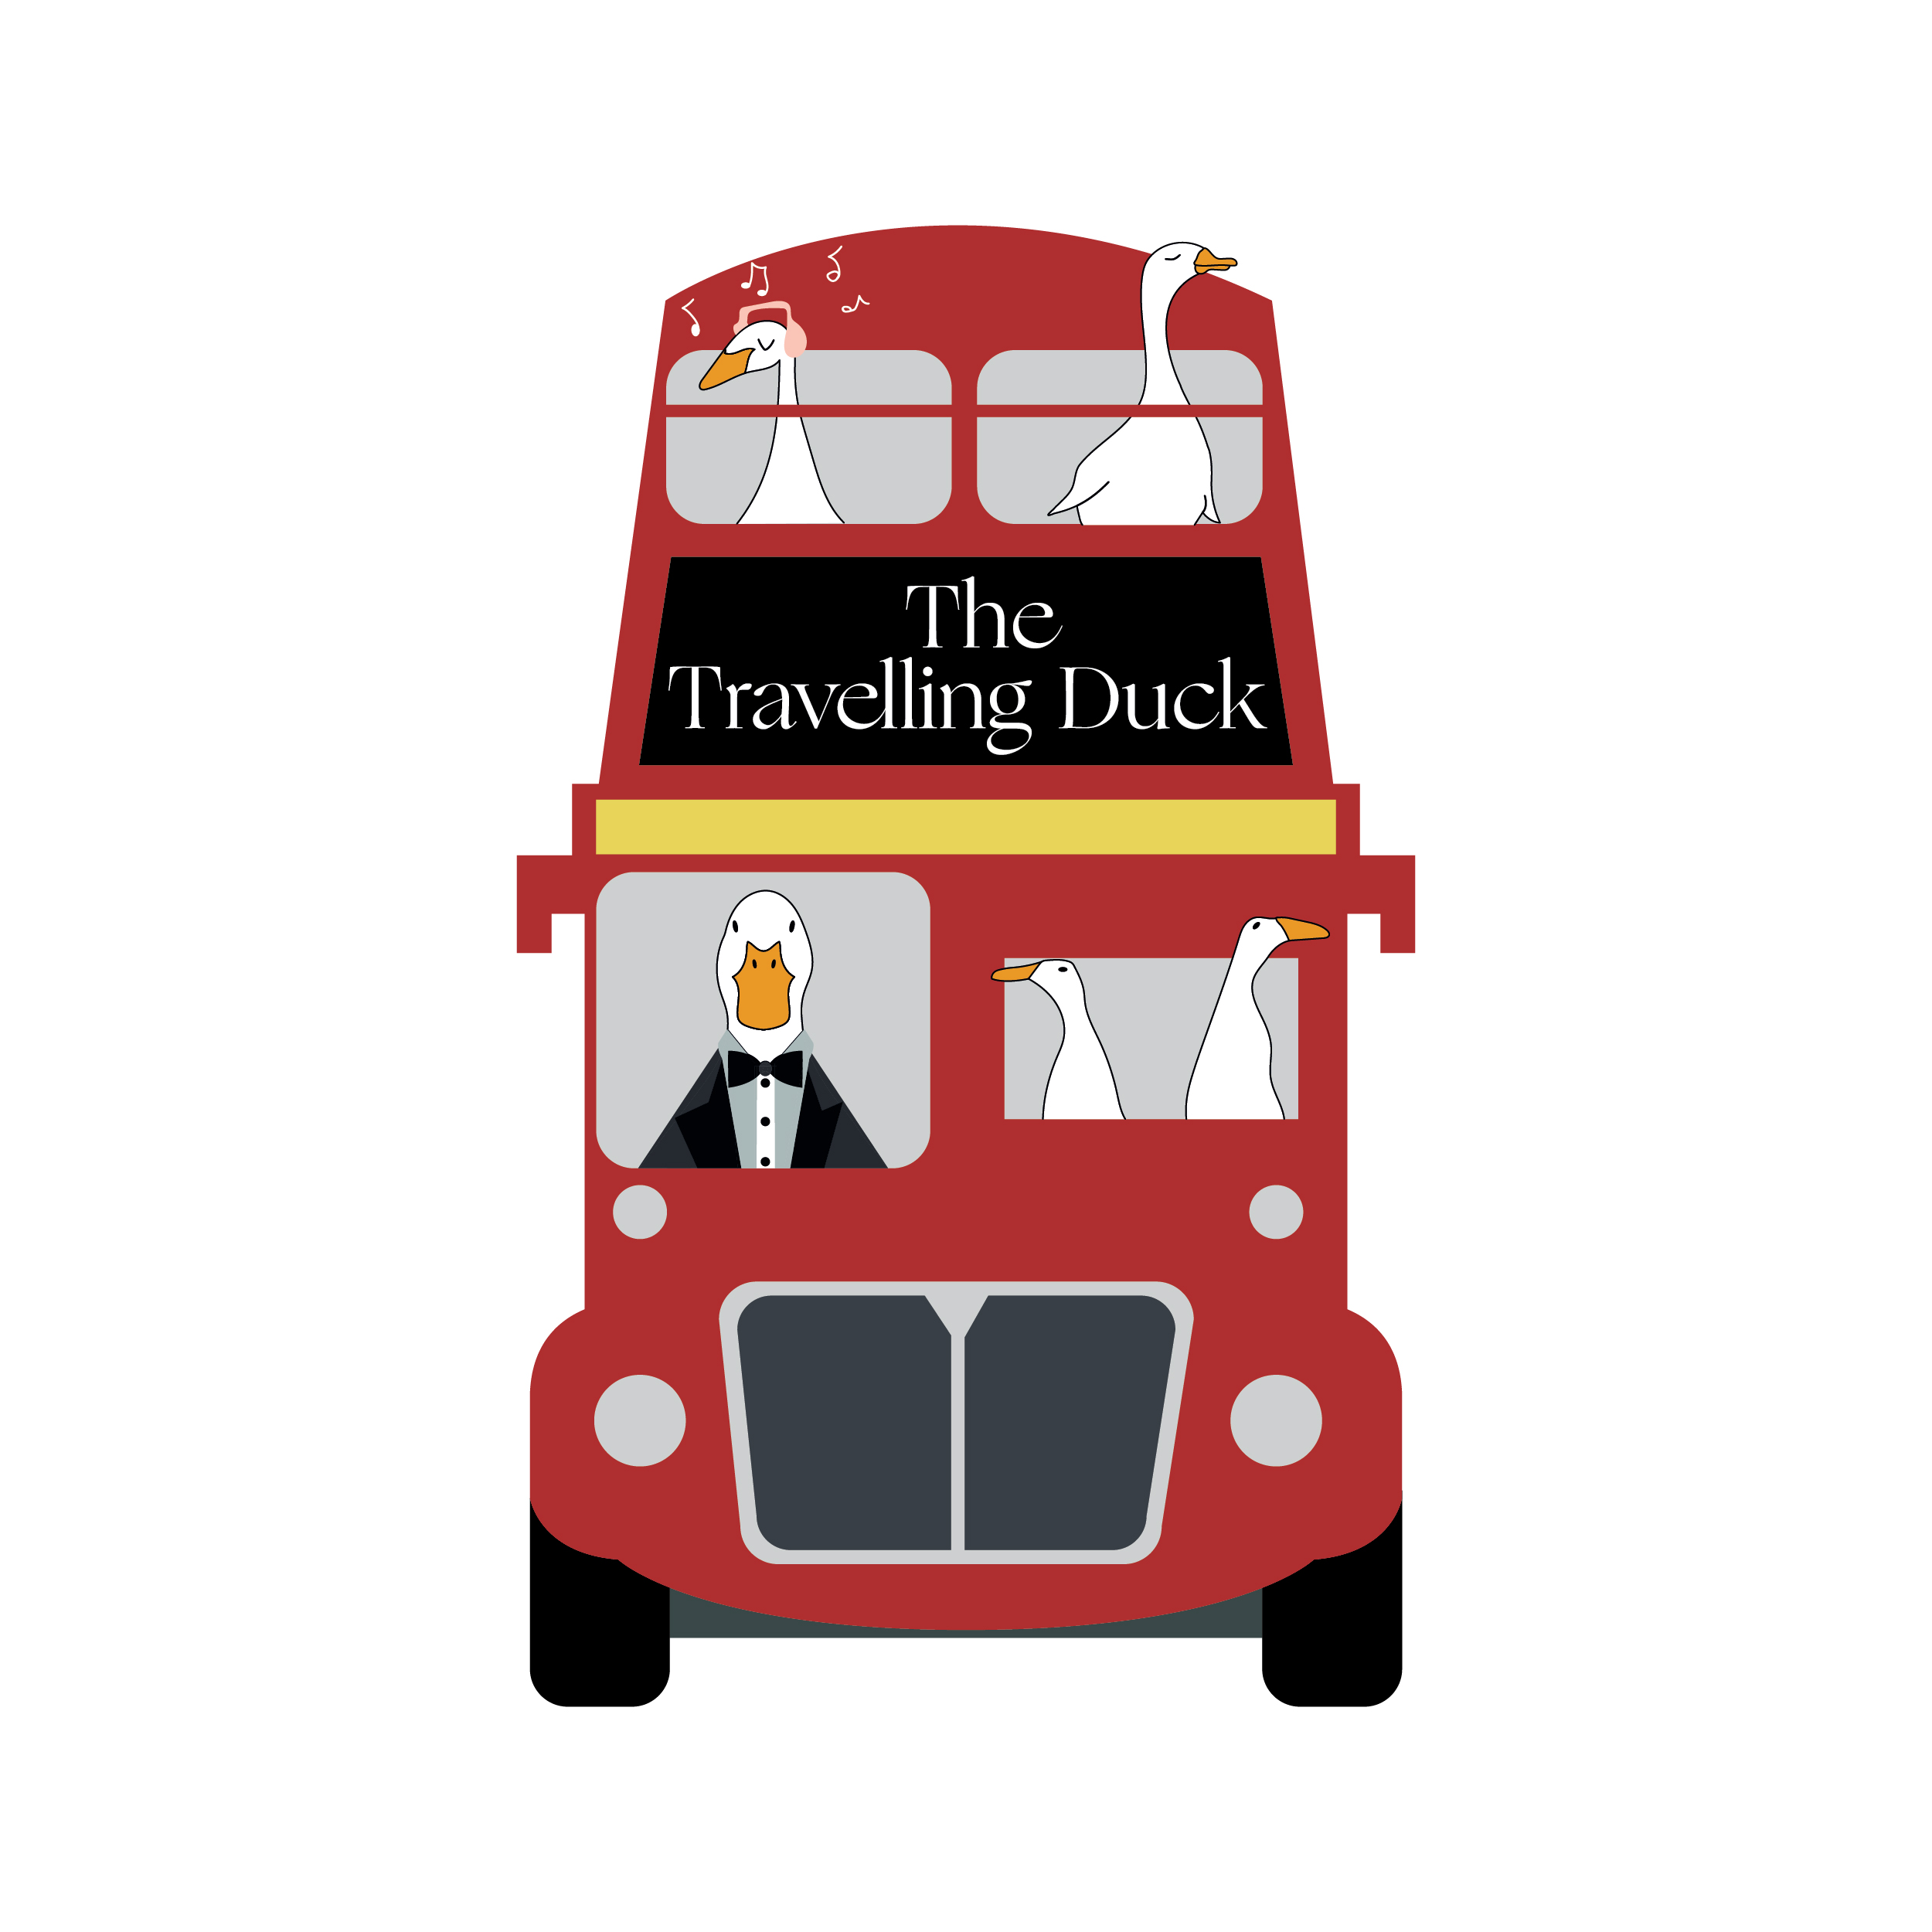 THE TRAVELLING DUCK